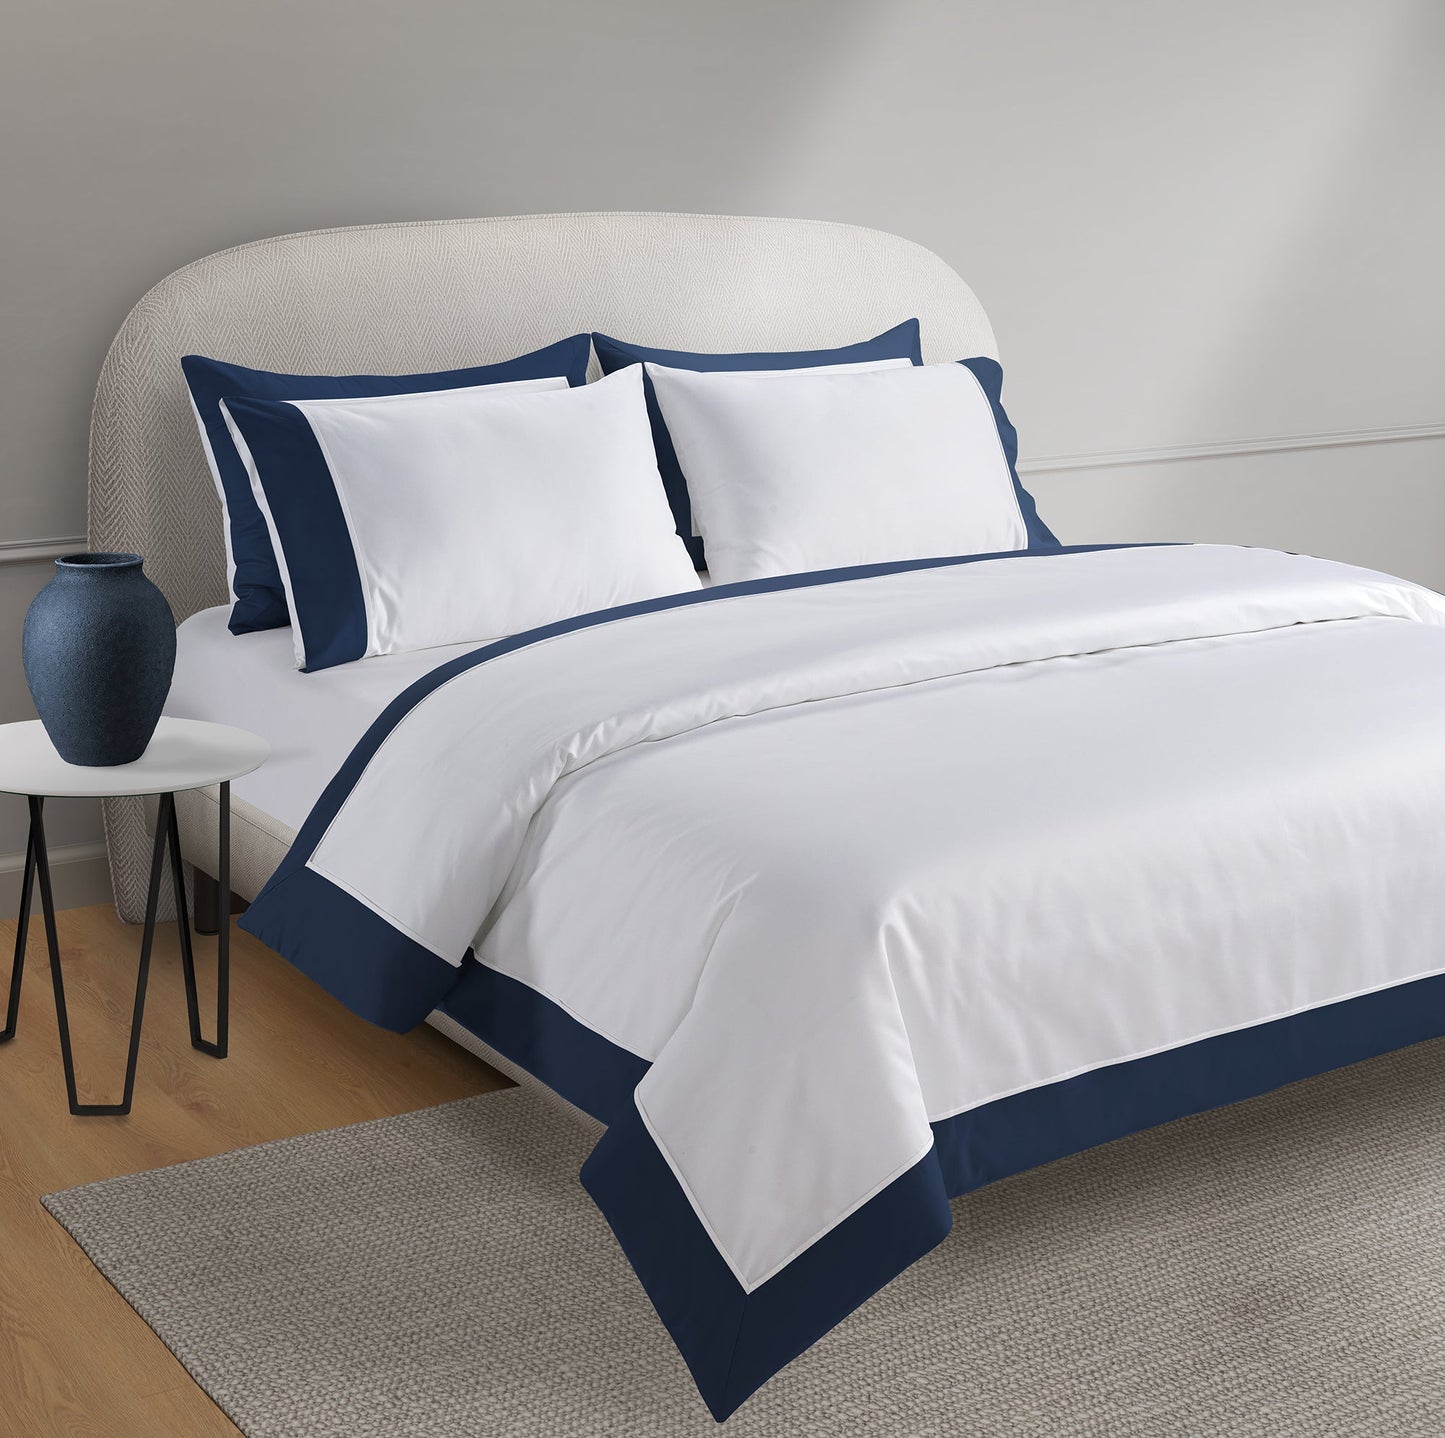 800 Thread Count Egyptian Cotton Windsor Lux Buttery Smooth Duvet Cover - Navy Peony